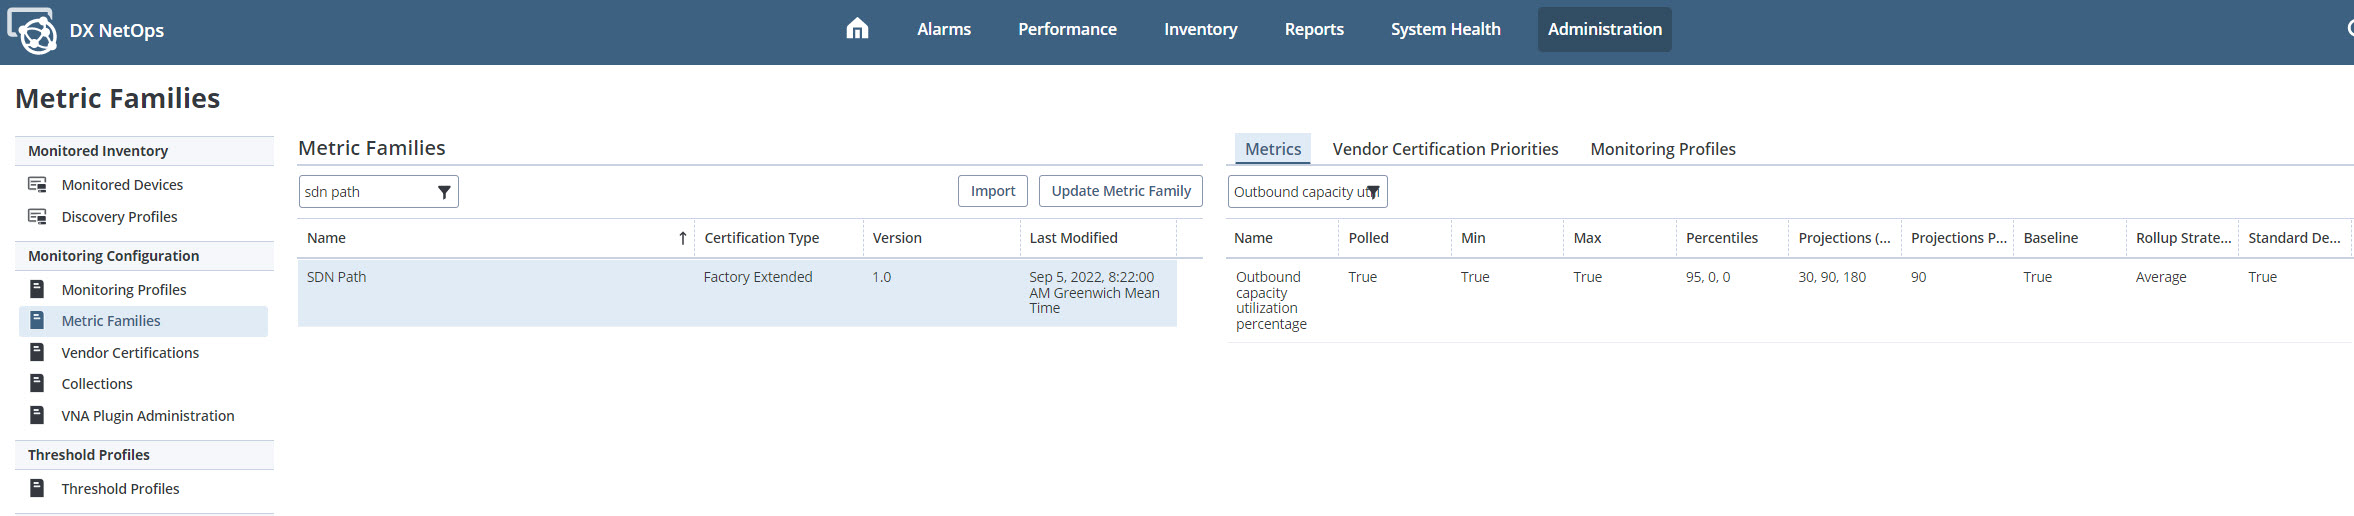 ESD_FY22_Academy-Blog.Optimize Your Infrastructure Resources for Continuity of Network Monitoring Operations.Figure 2